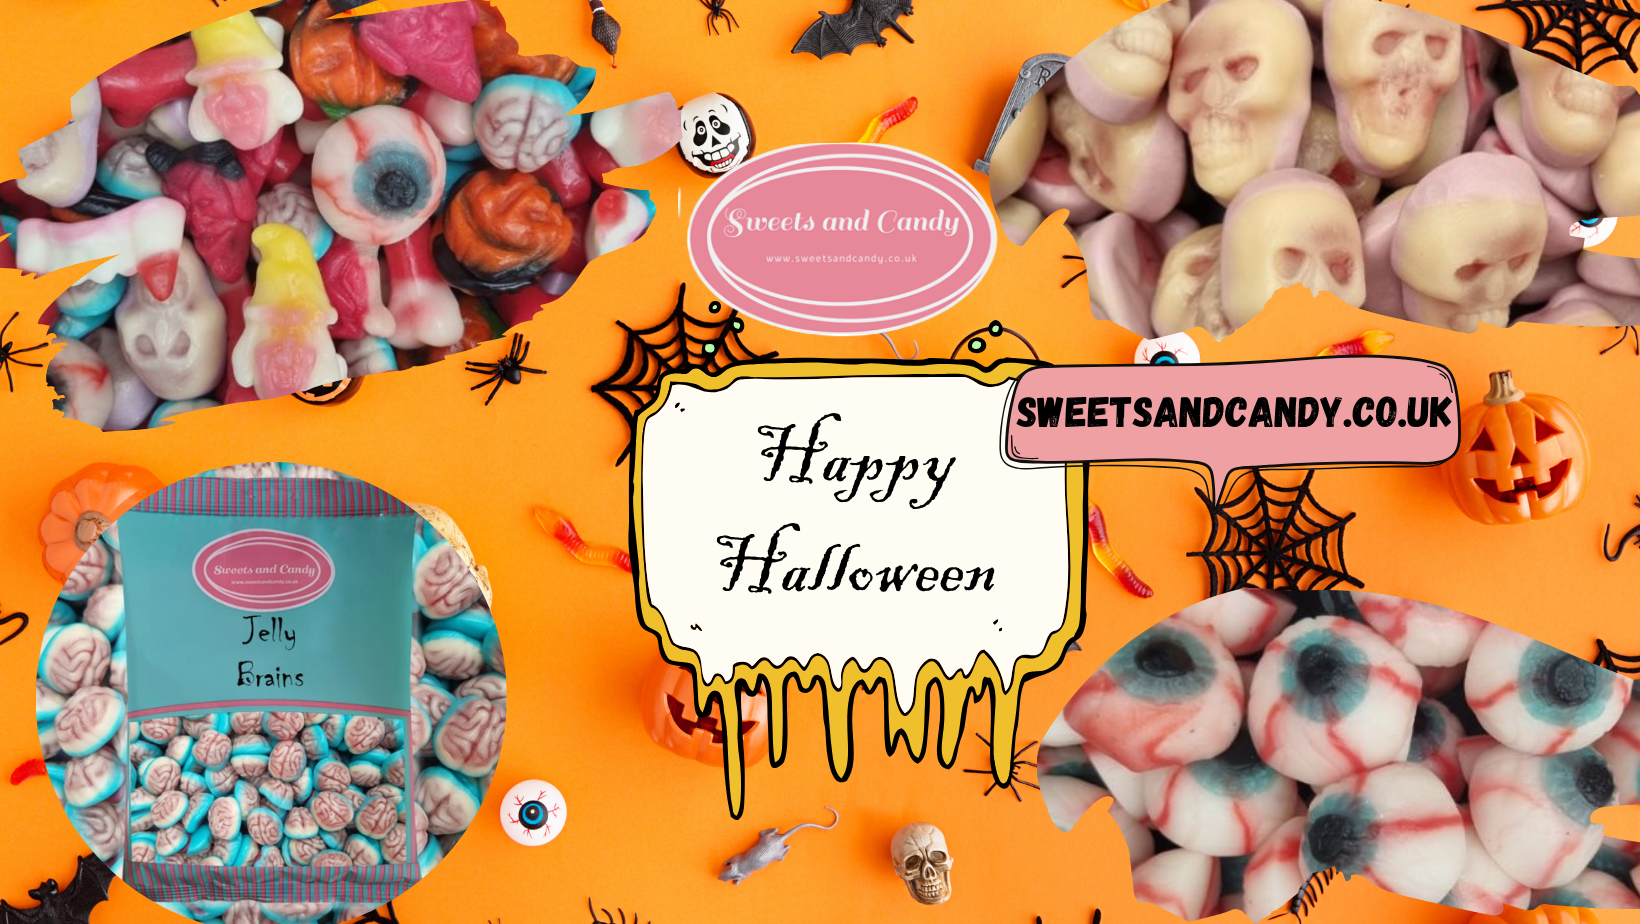 Deliciously Spooky selection of Halloween Sweets From sweets and candy